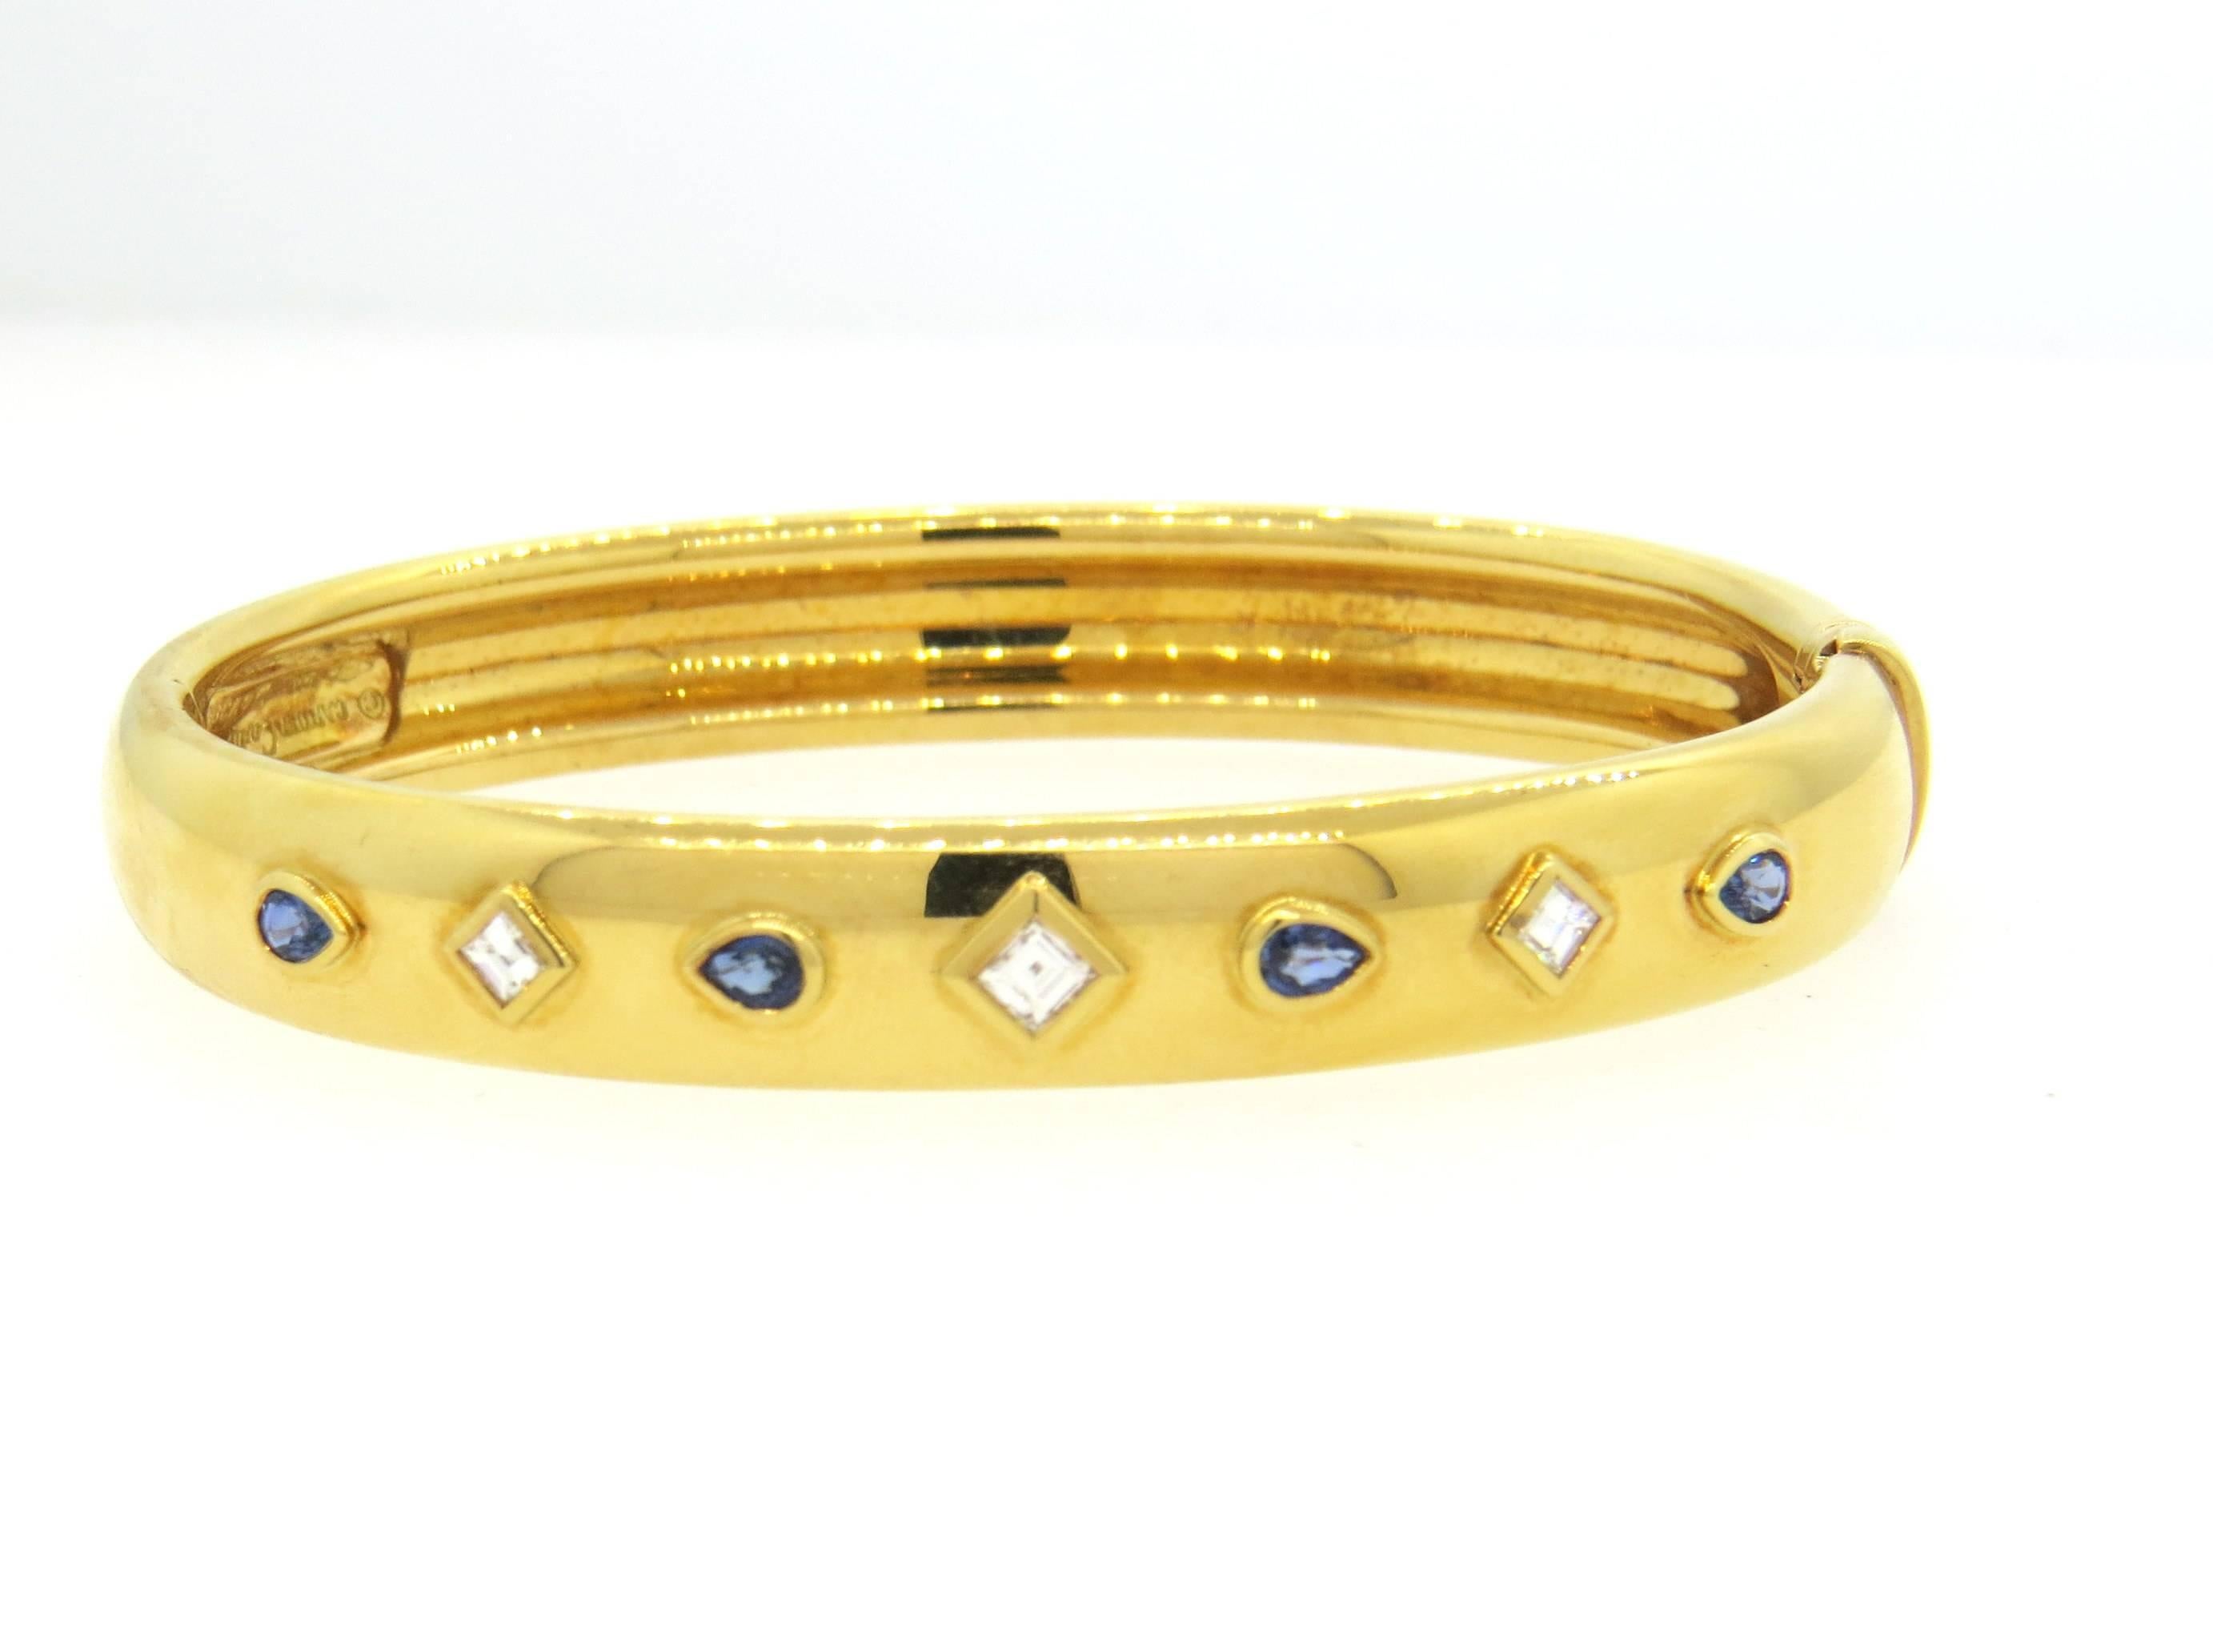 18k yellow gold bangle, crafted by Cartier, set with blue sapphires and  diamonds. Bracelet will comfortably fit up to 6 1/2